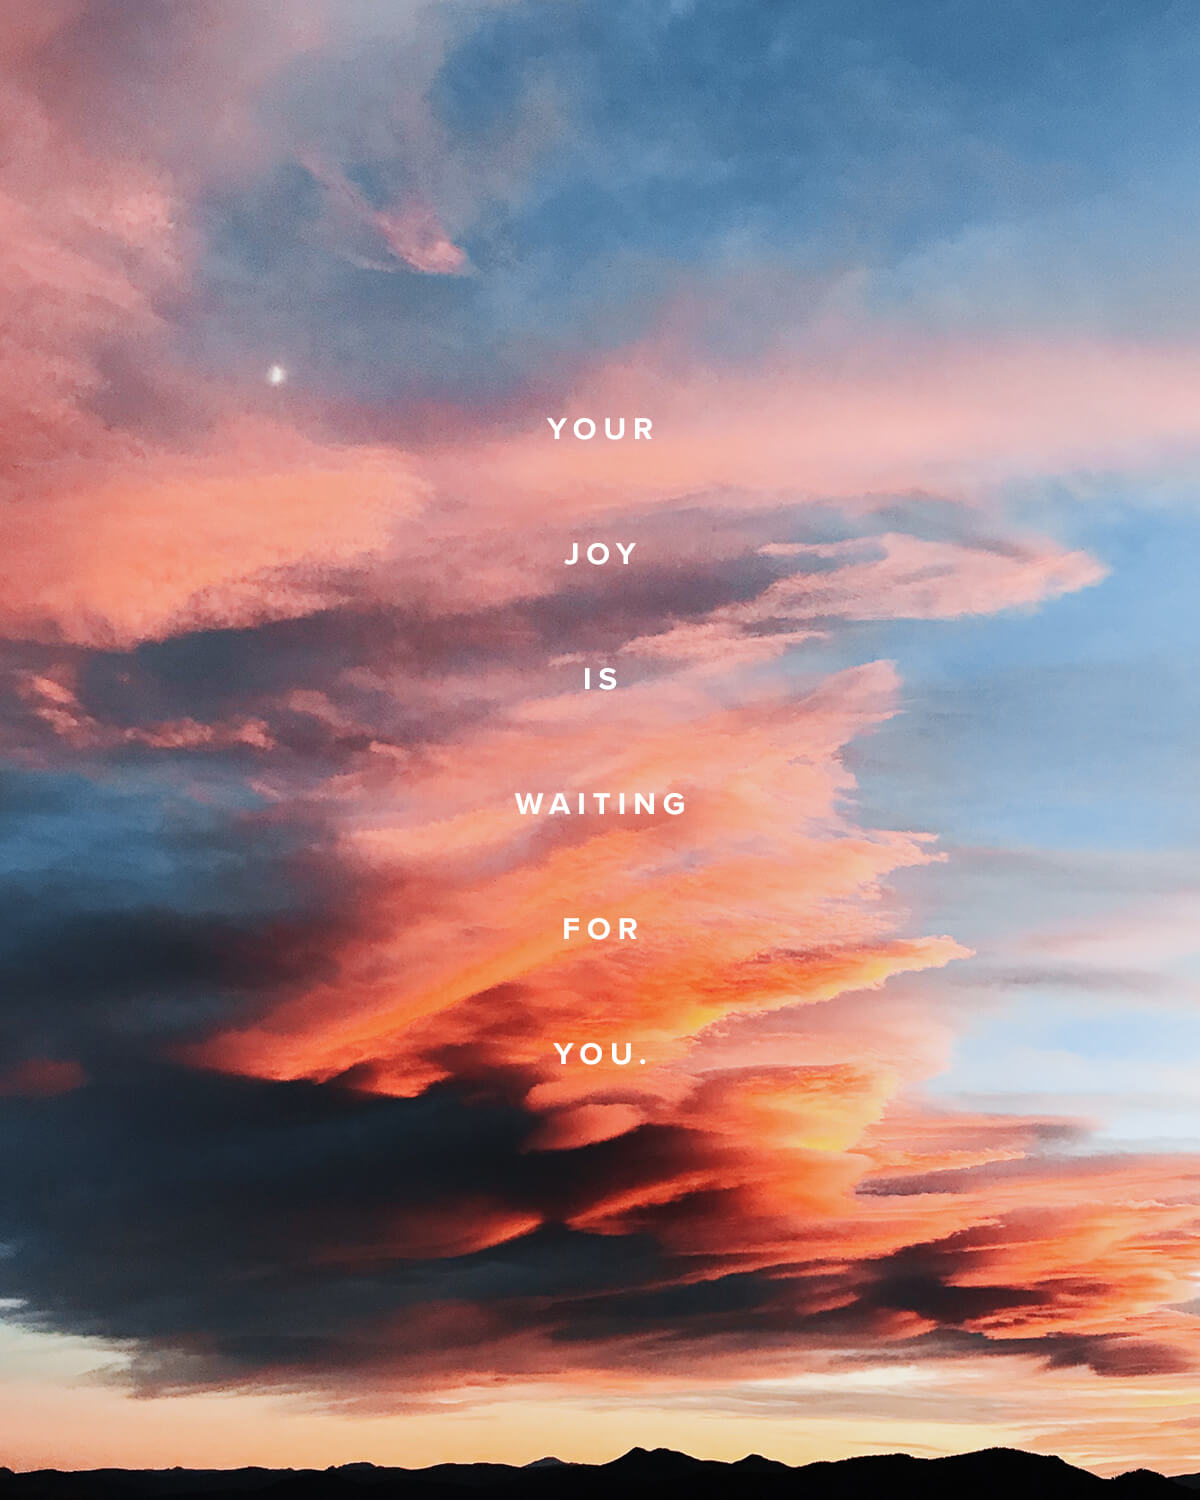 Your joy is waiting for you